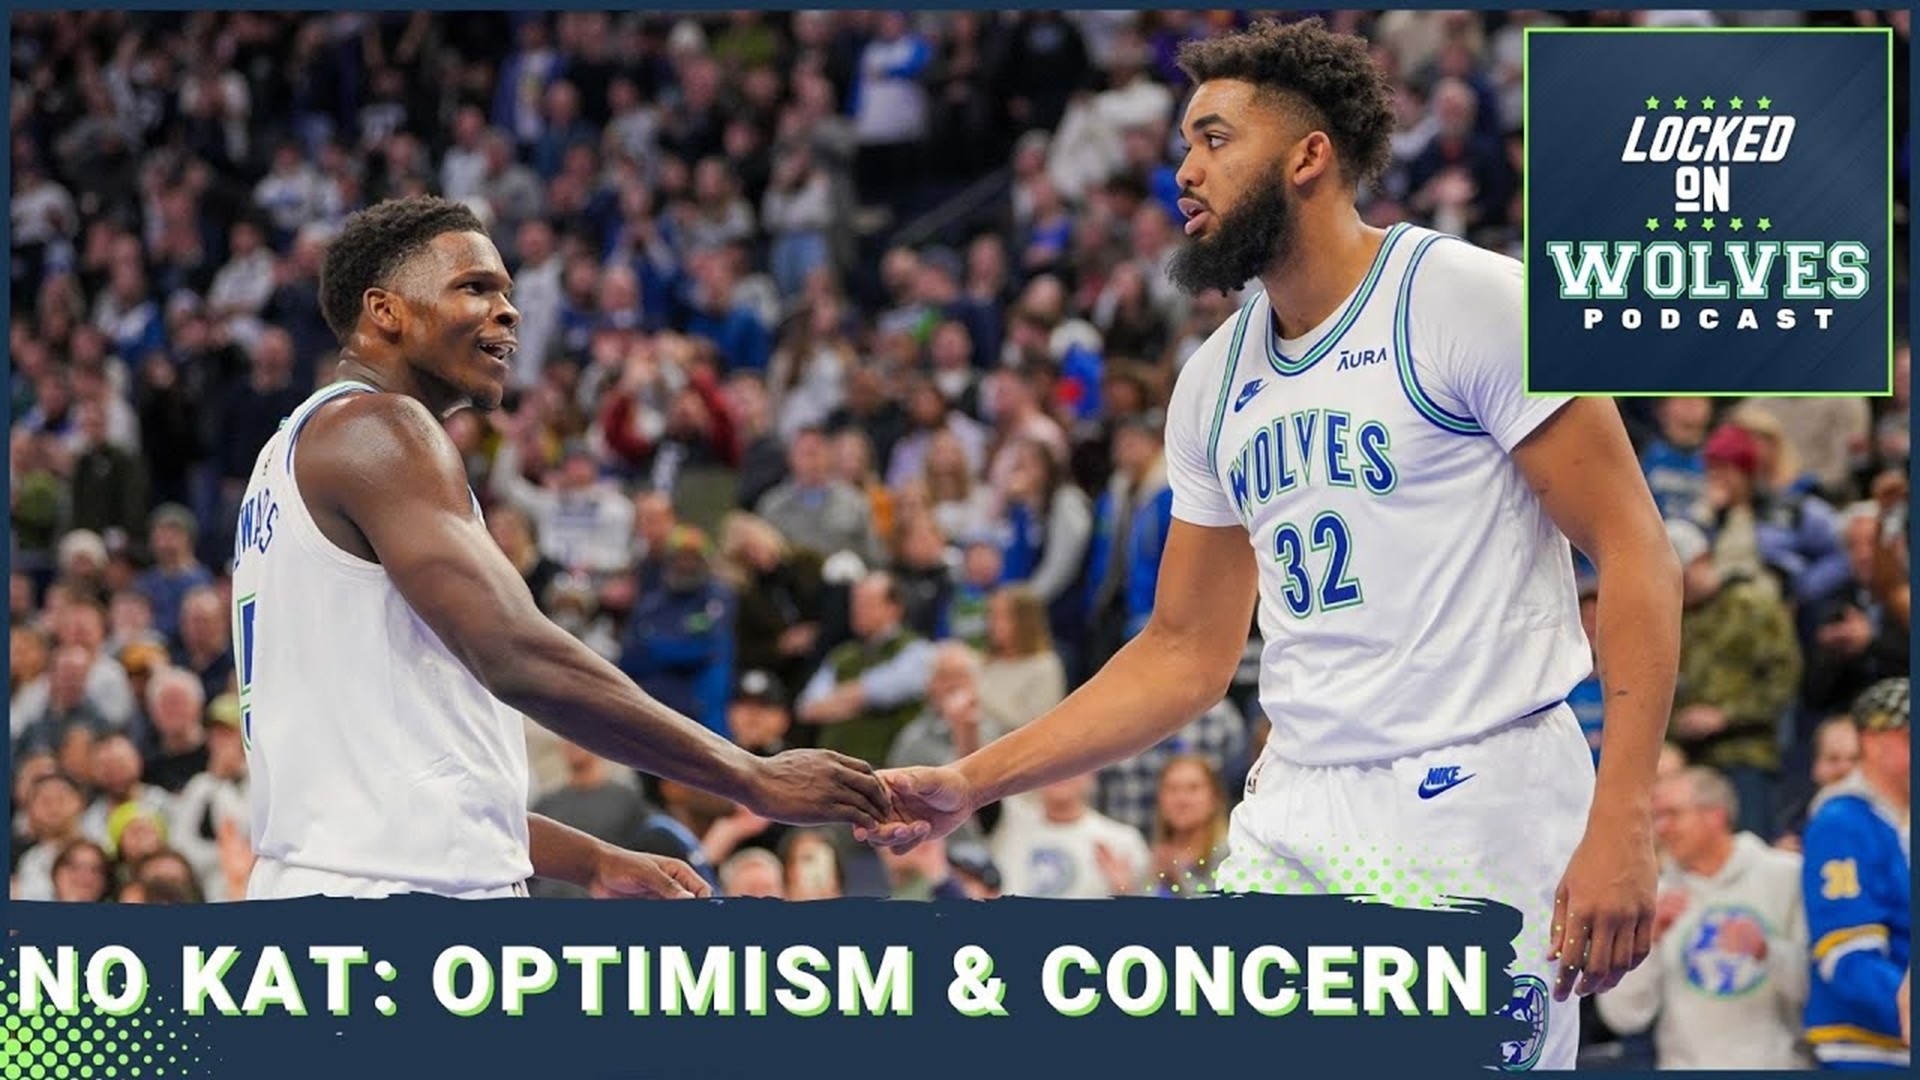 Optimism and Concern: Both sides of the Minnesota Timberwolves without Karl-Anthony Towns